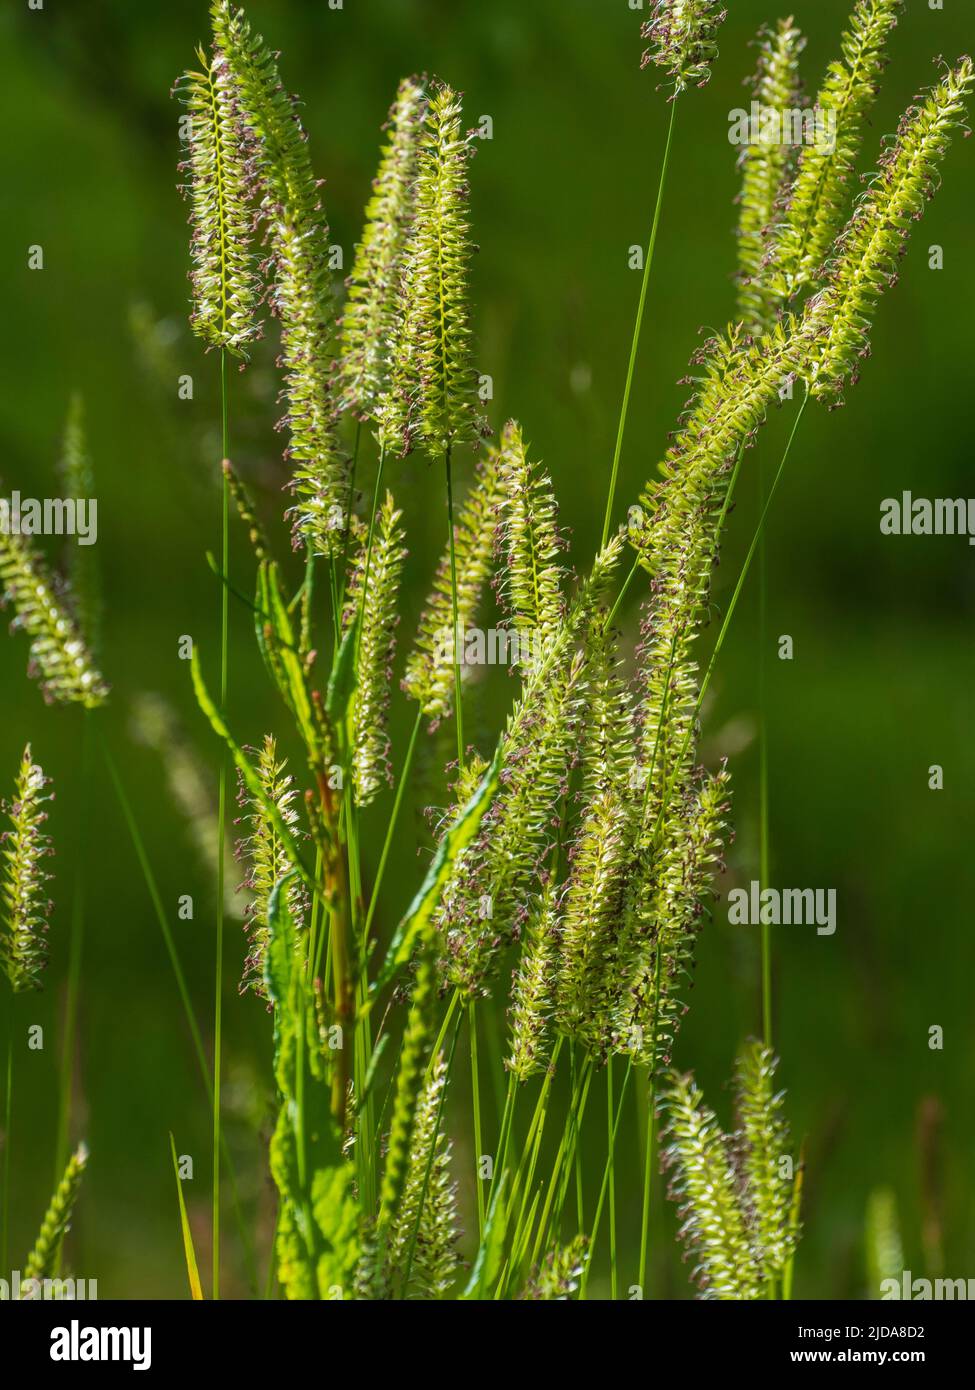 Flattened flowering panicles of the UK meadow and roadside Crested dog's-tail grass, Cynosurus cristatus Stock Photo